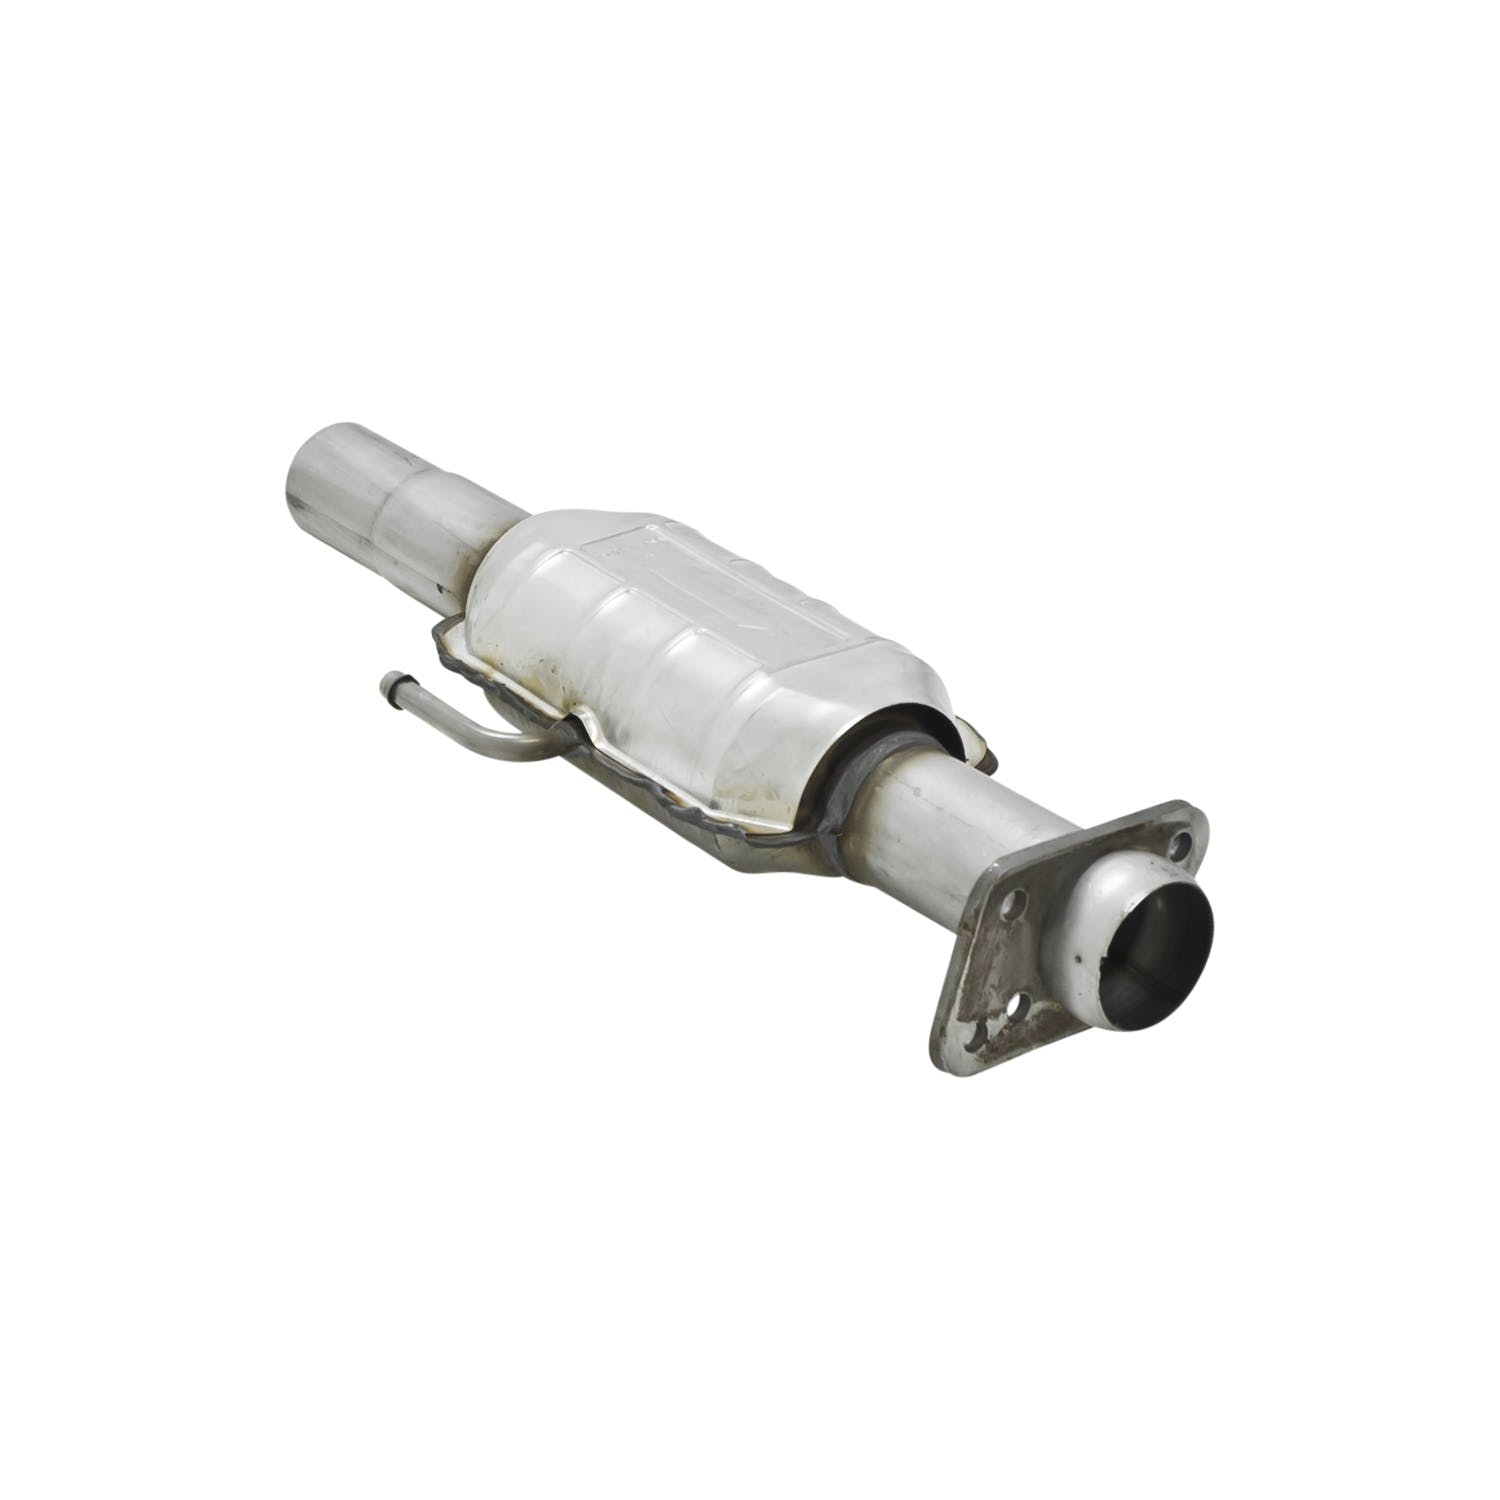 Flowmaster Catalytic Converters 2010001 Catalytic Converter-Direct Fit-2.50 in. Inlet/Outlet-49 State